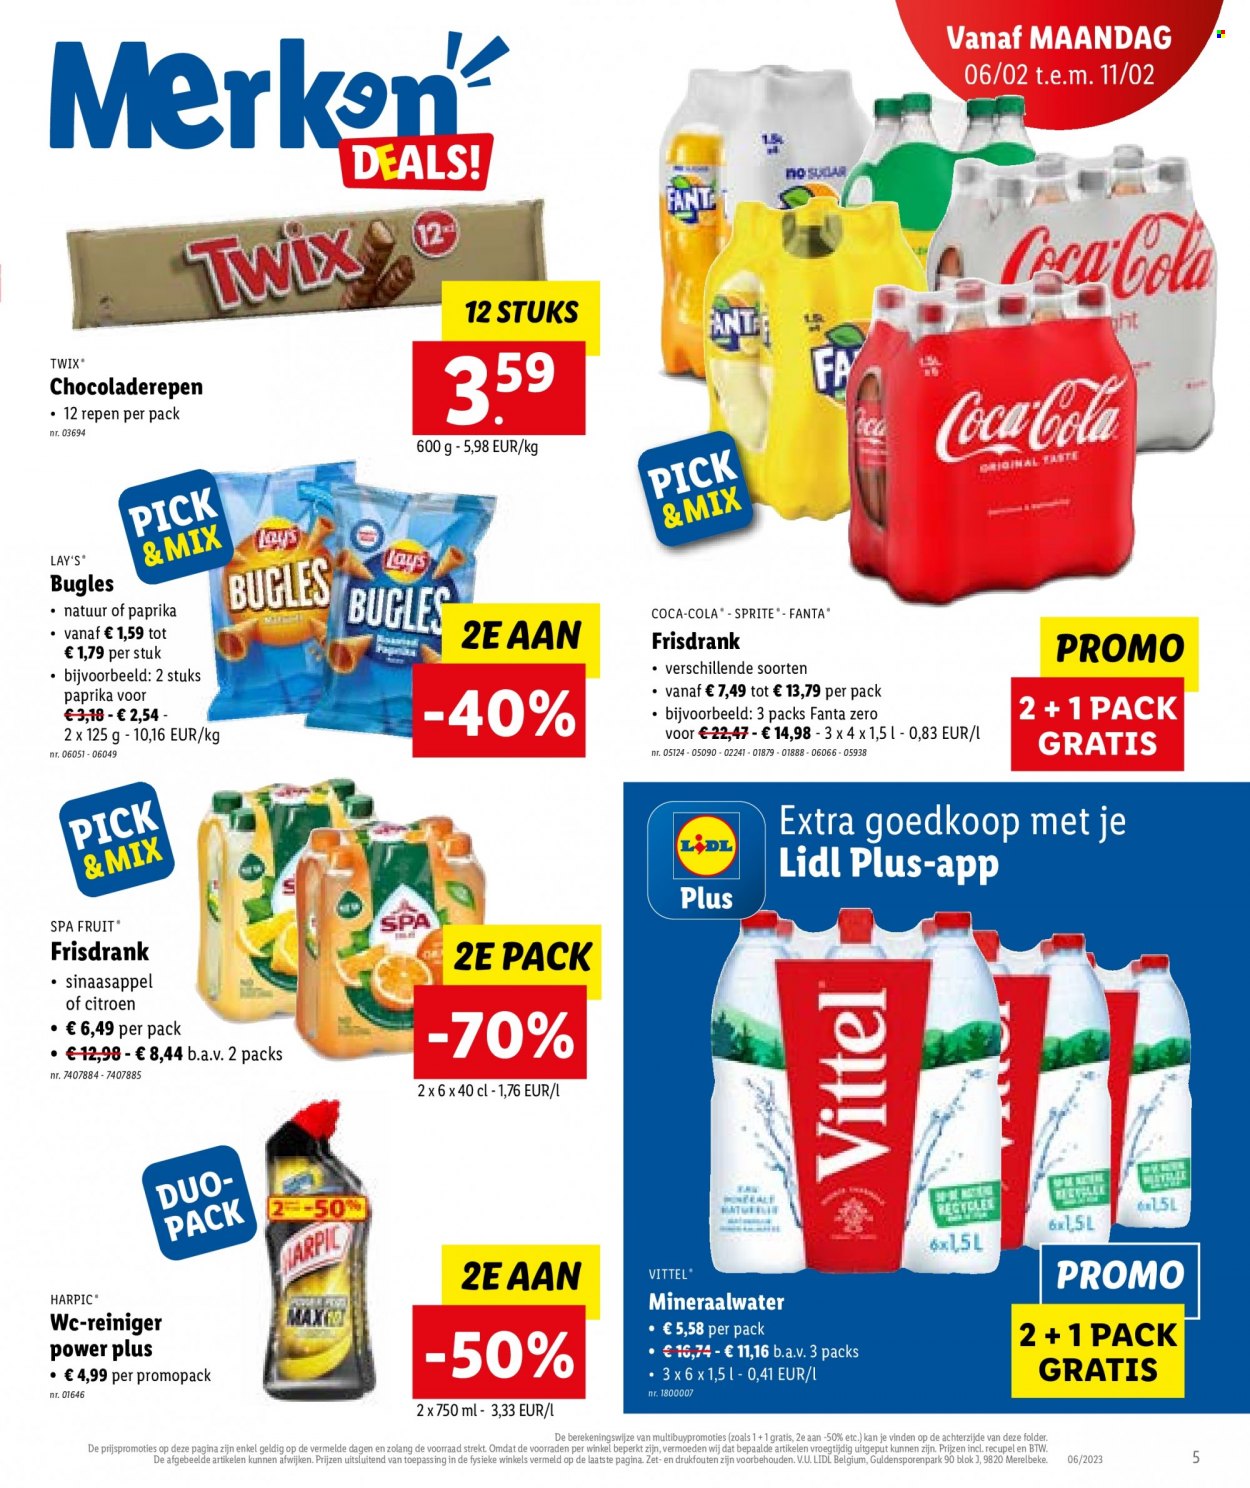 Catalogue Lidl - 6.2.2023 - 11.2.2023. Page 5.